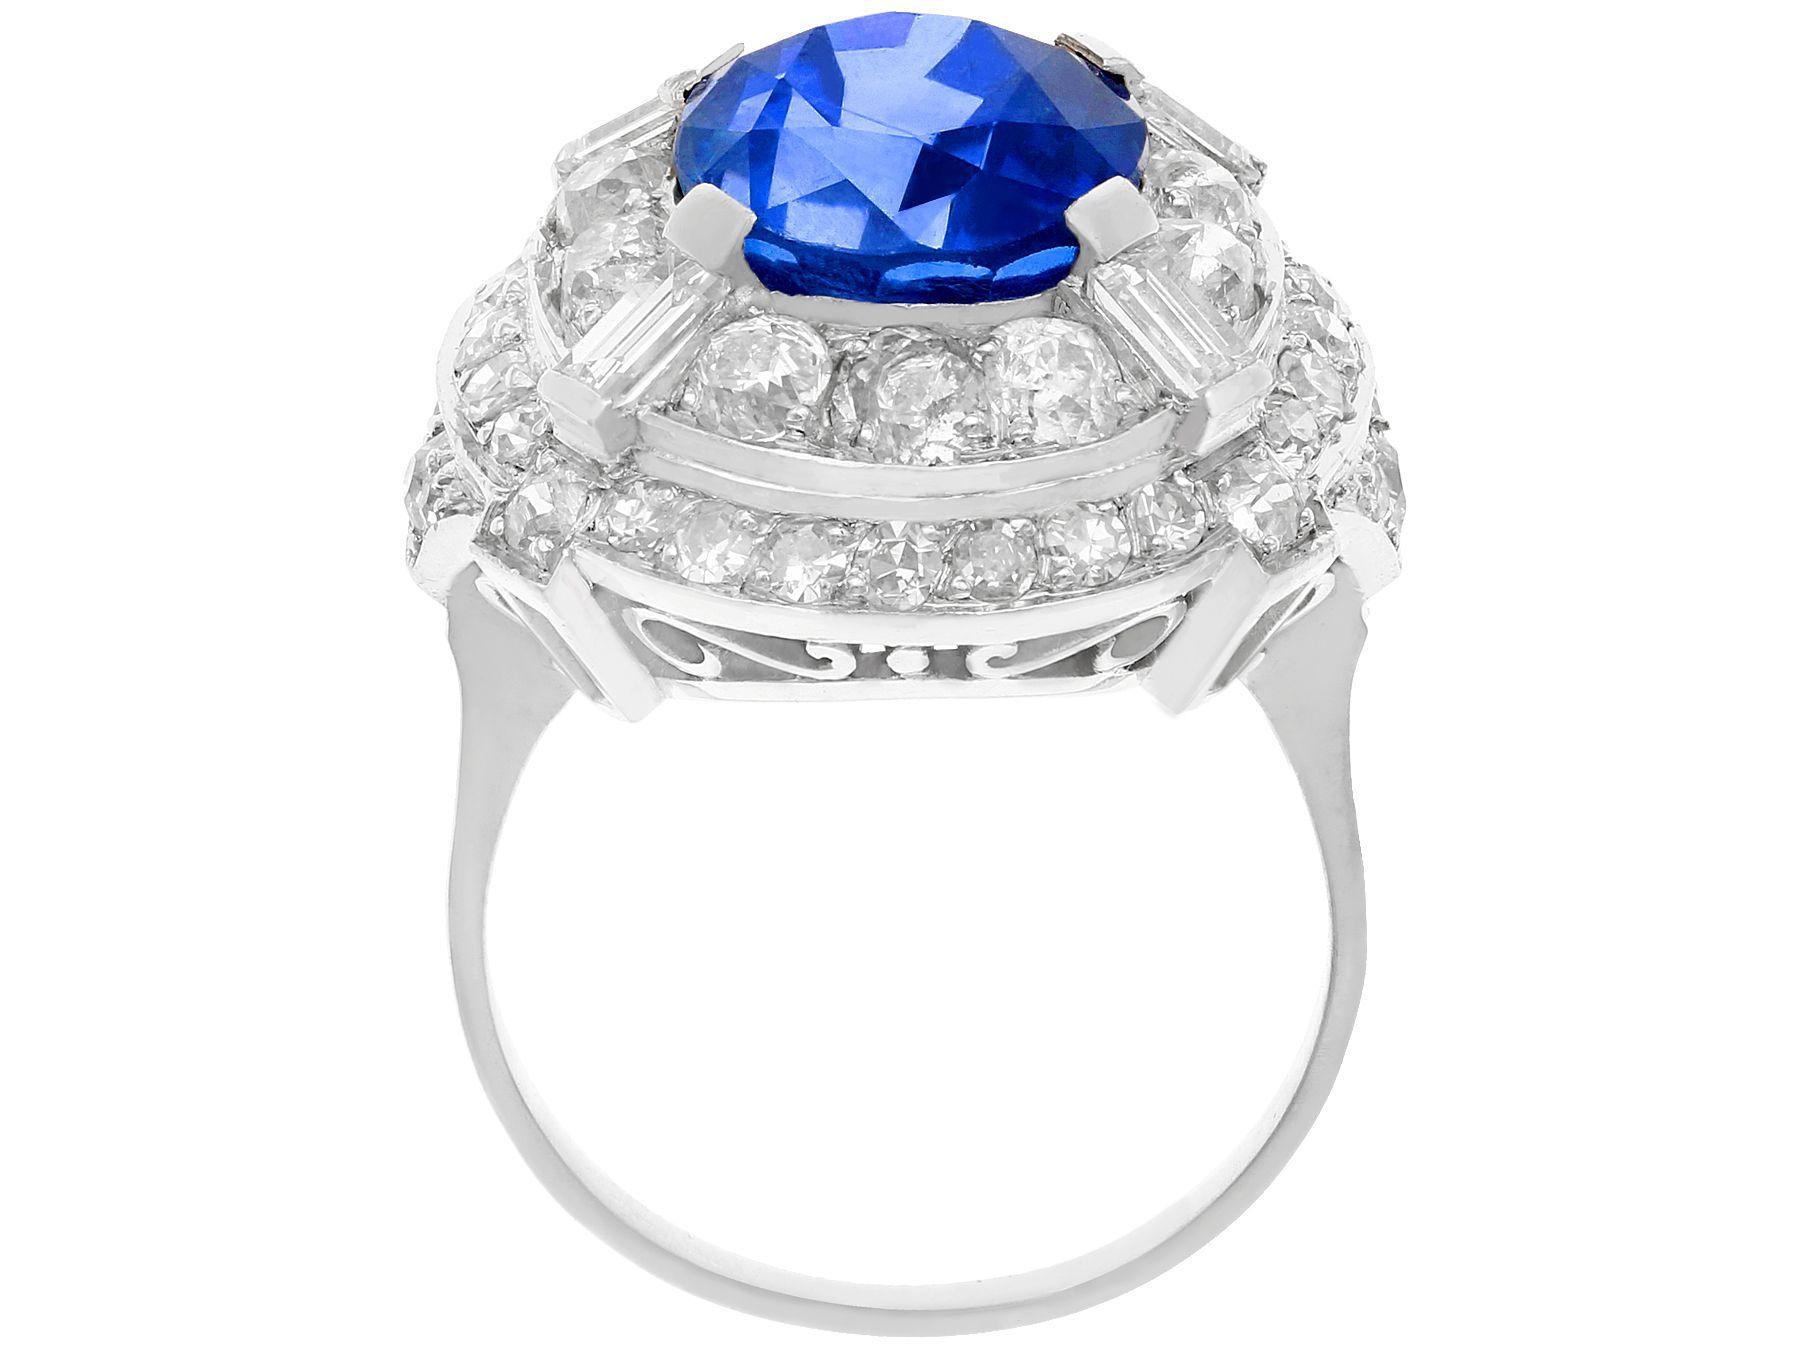 Women's or Men's 8.80 Carat Ceylon Sapphire and 2.68 Carat Diamond Cocktail Ring in White Gold For Sale